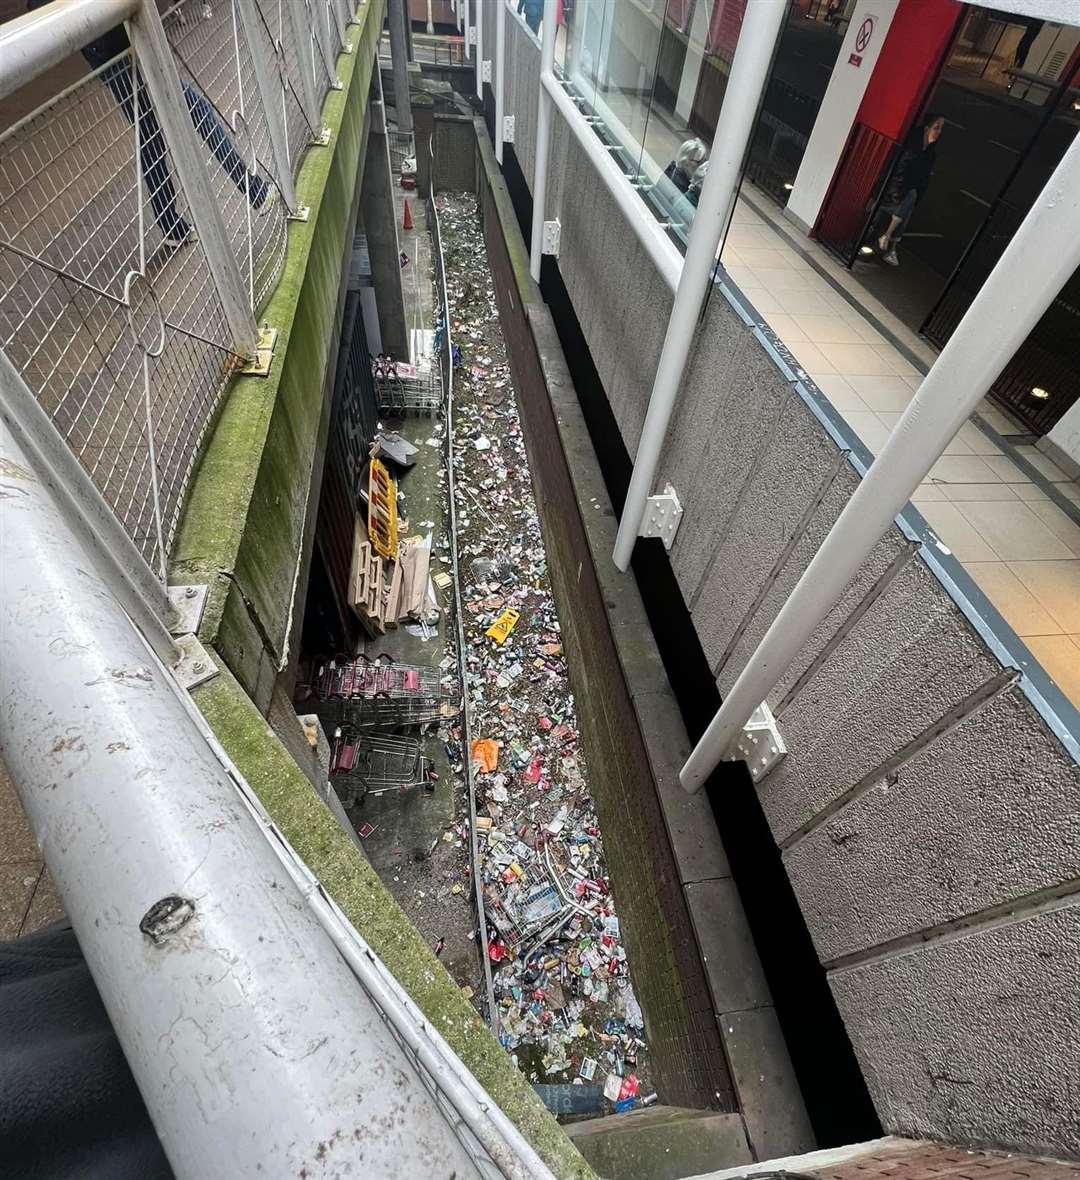 Discarded rubbish has been left for months. Picture: Matt Stephens